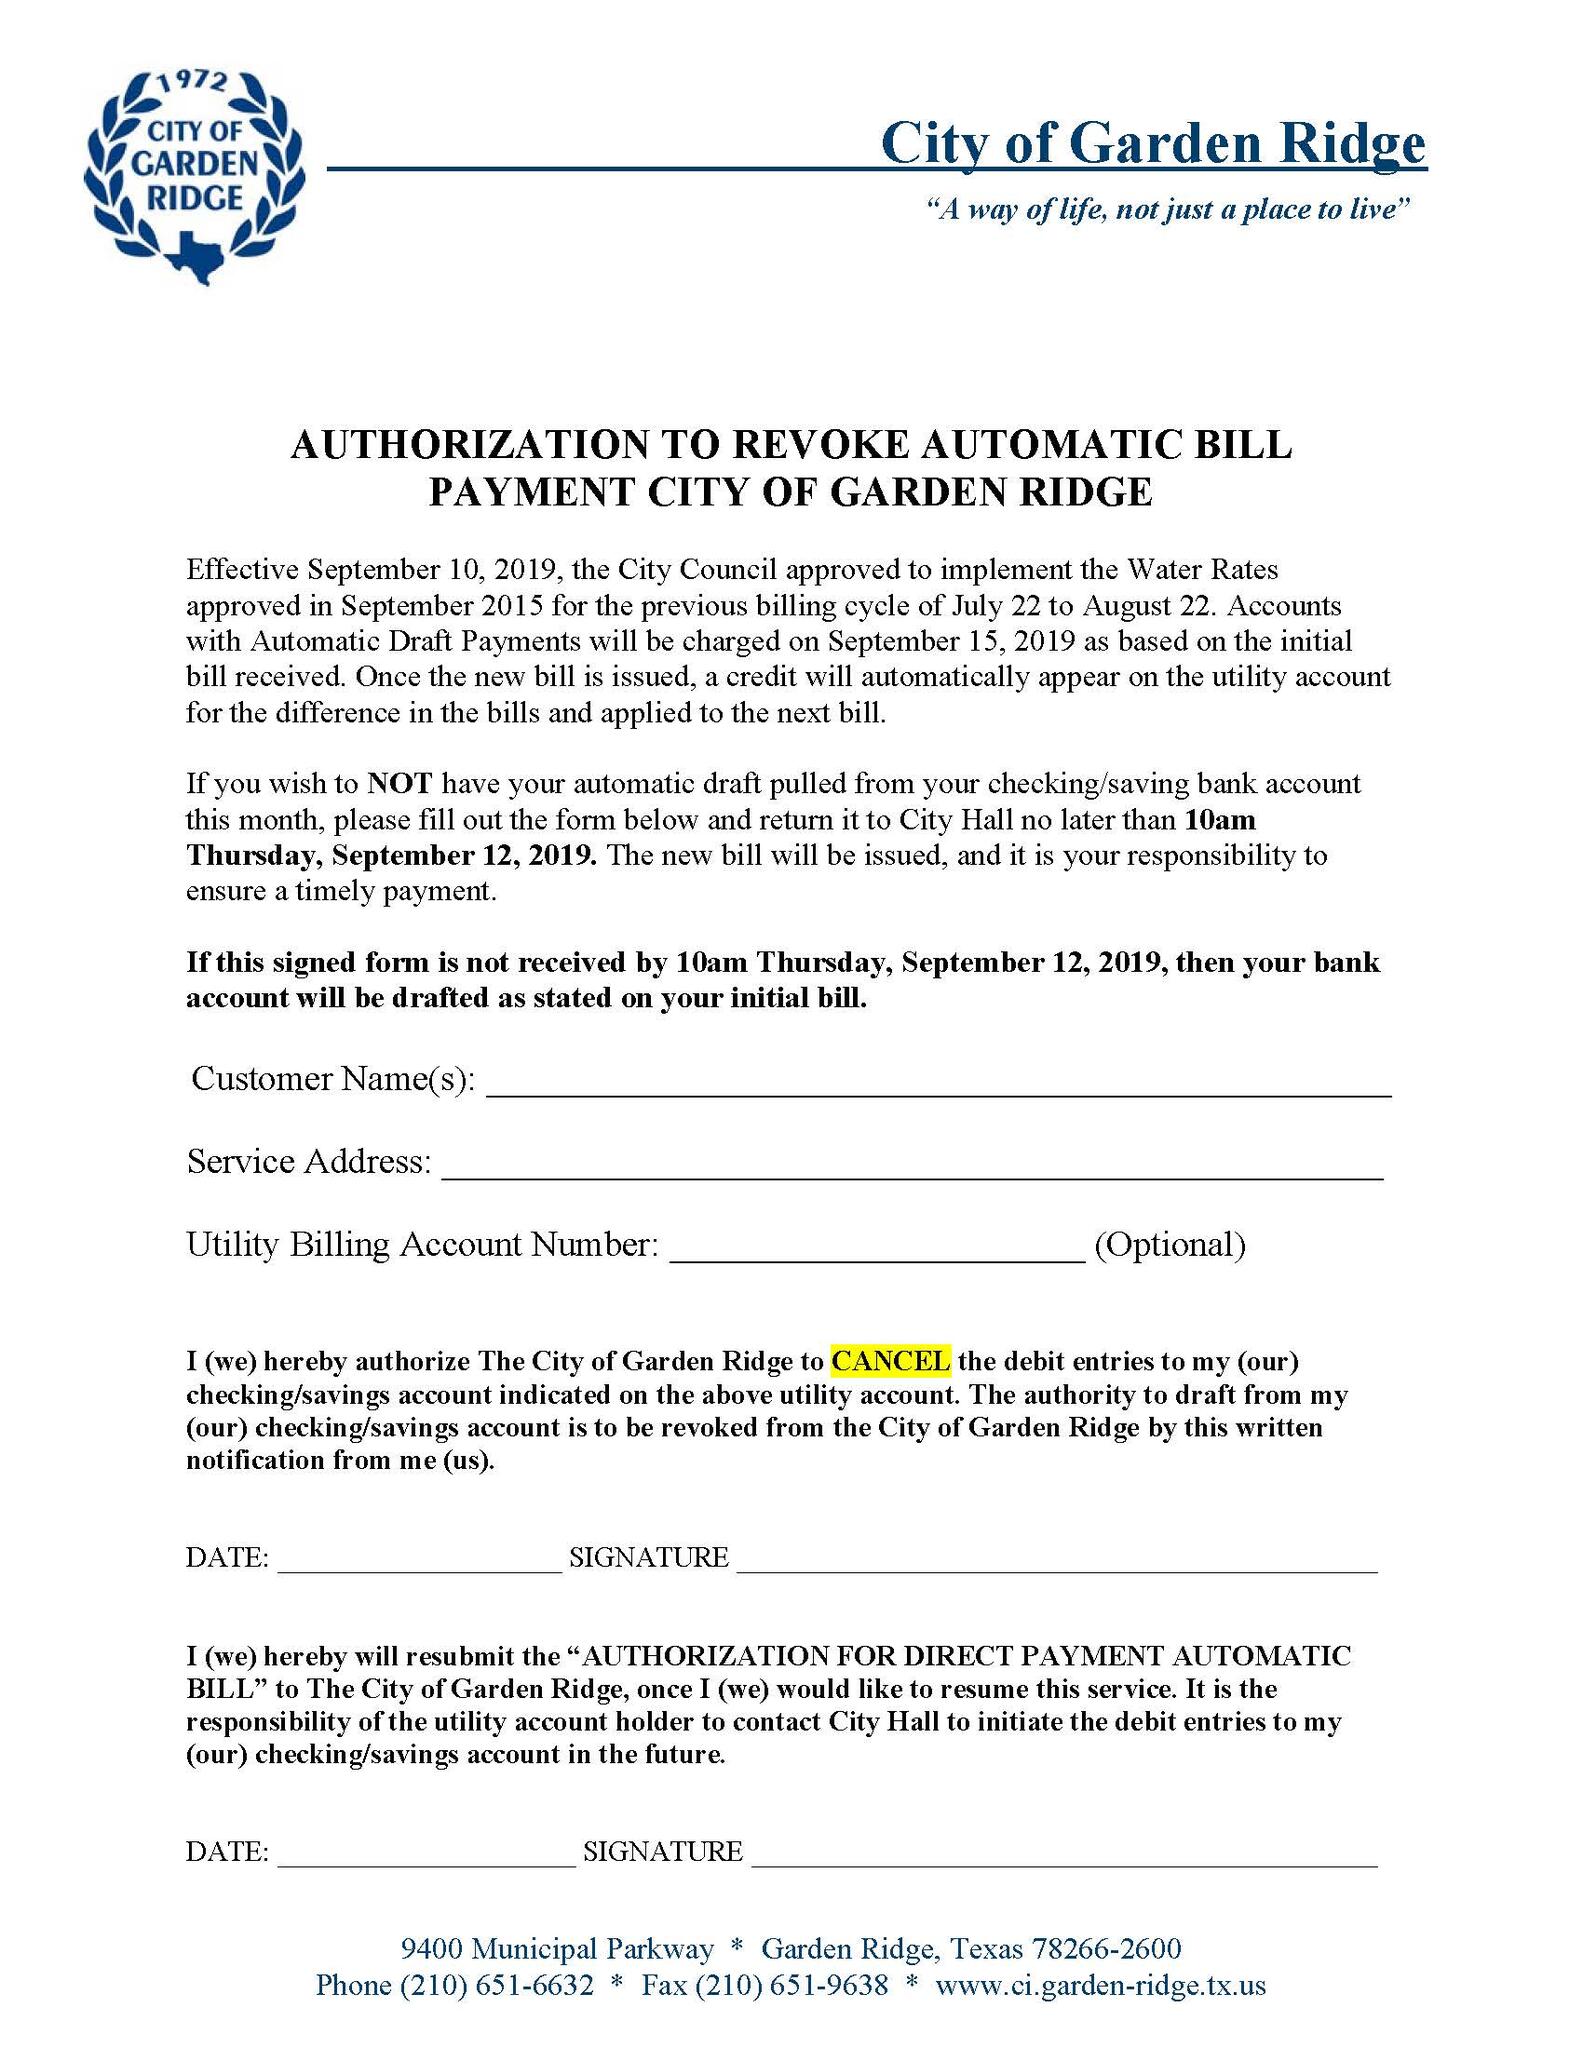 Automatic Draft Payment Revoke Form For September Bill City Of